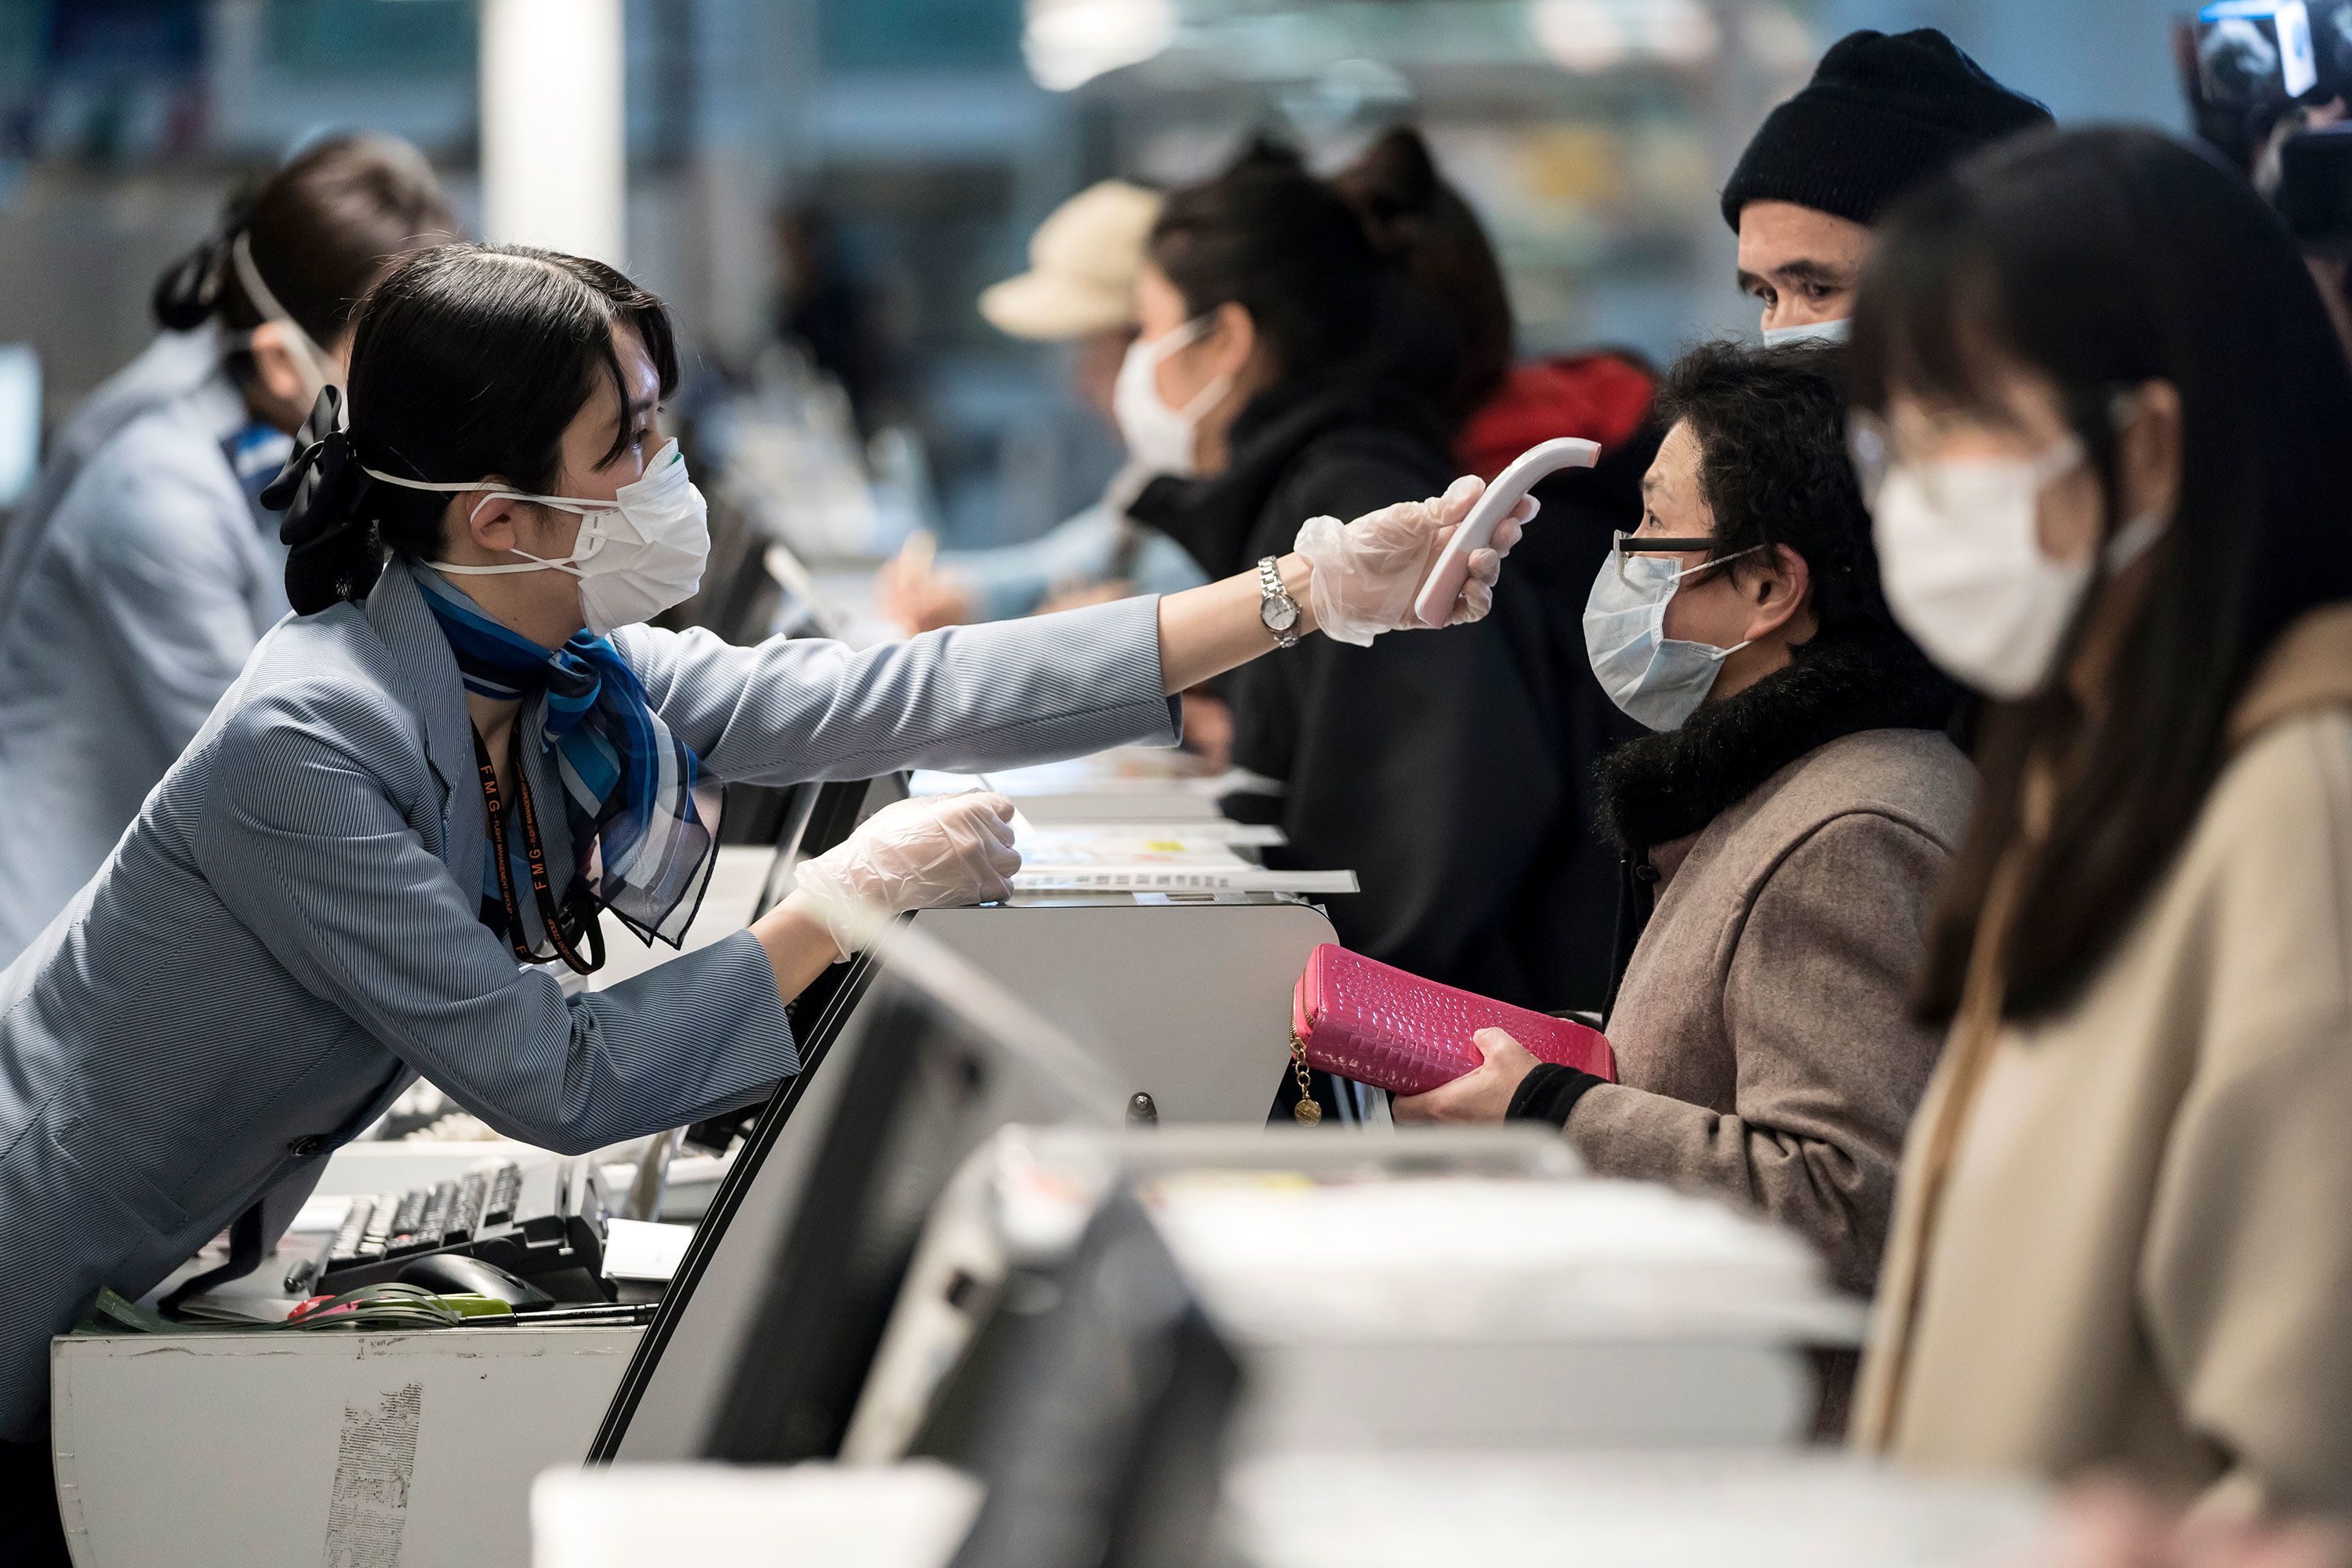 Temperature Checks Are Becoming Part of the Airline Boarding